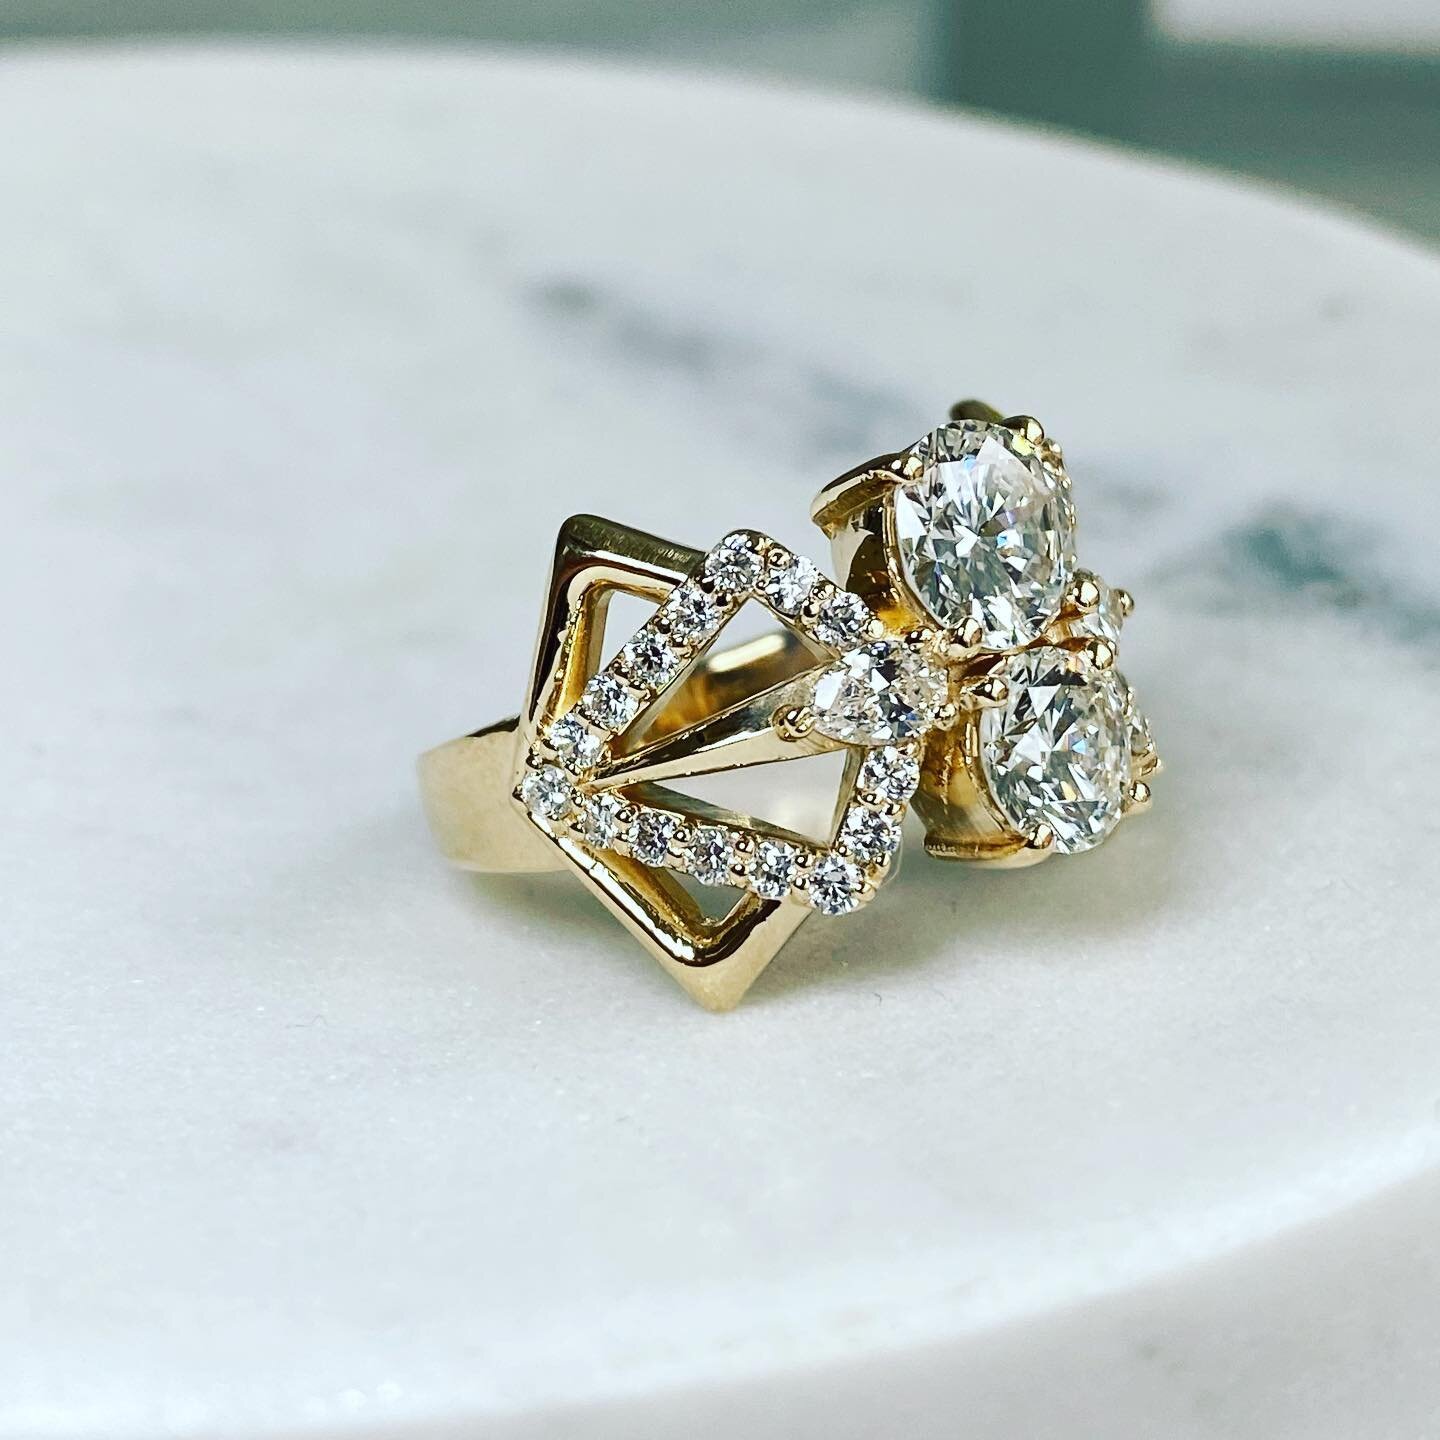 swipe to see this custom ring!🤩
⠀⠀⠀⠀⠀⠀⠀⠀⠀
Delivered this last week to my lovely client. She had diamonds of her mother's, some of hers and a few new ones to create something bold+captivating. 
⠀⠀⠀⠀⠀⠀⠀⠀⠀
The taper toward the center creates focus on h